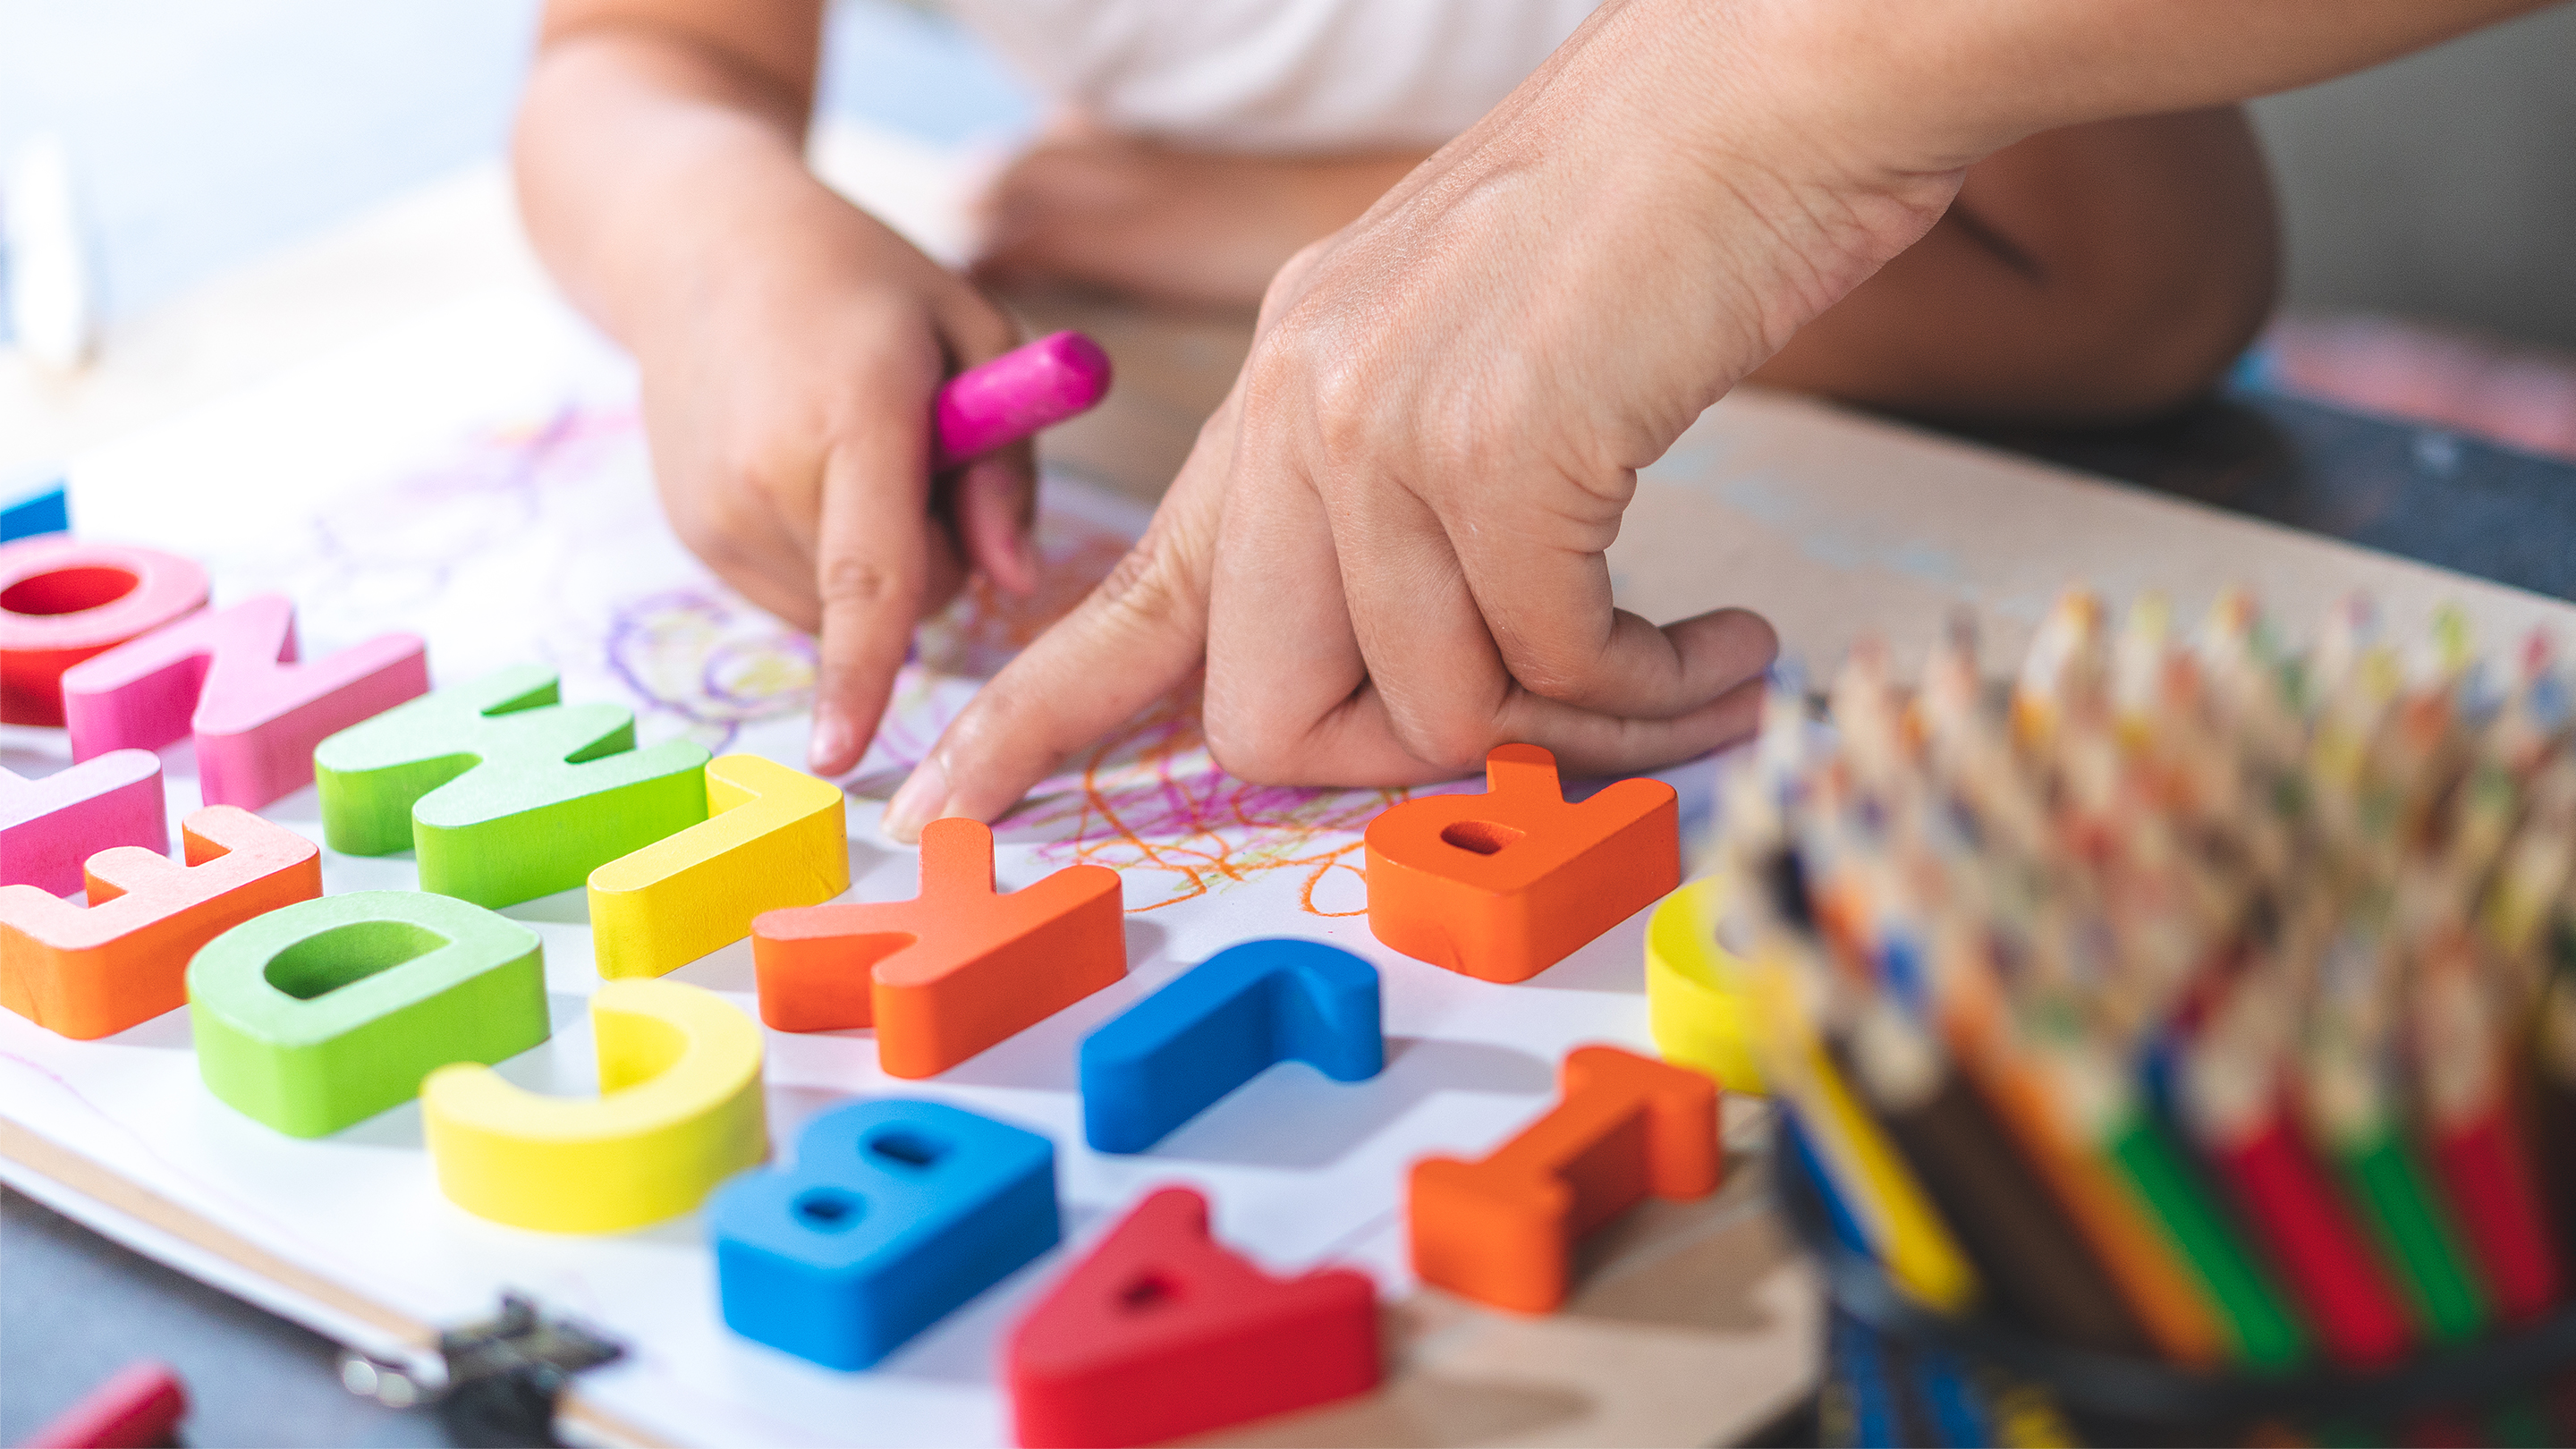 Free Play Ideas That Promote Learning in Your Preschool - Educa